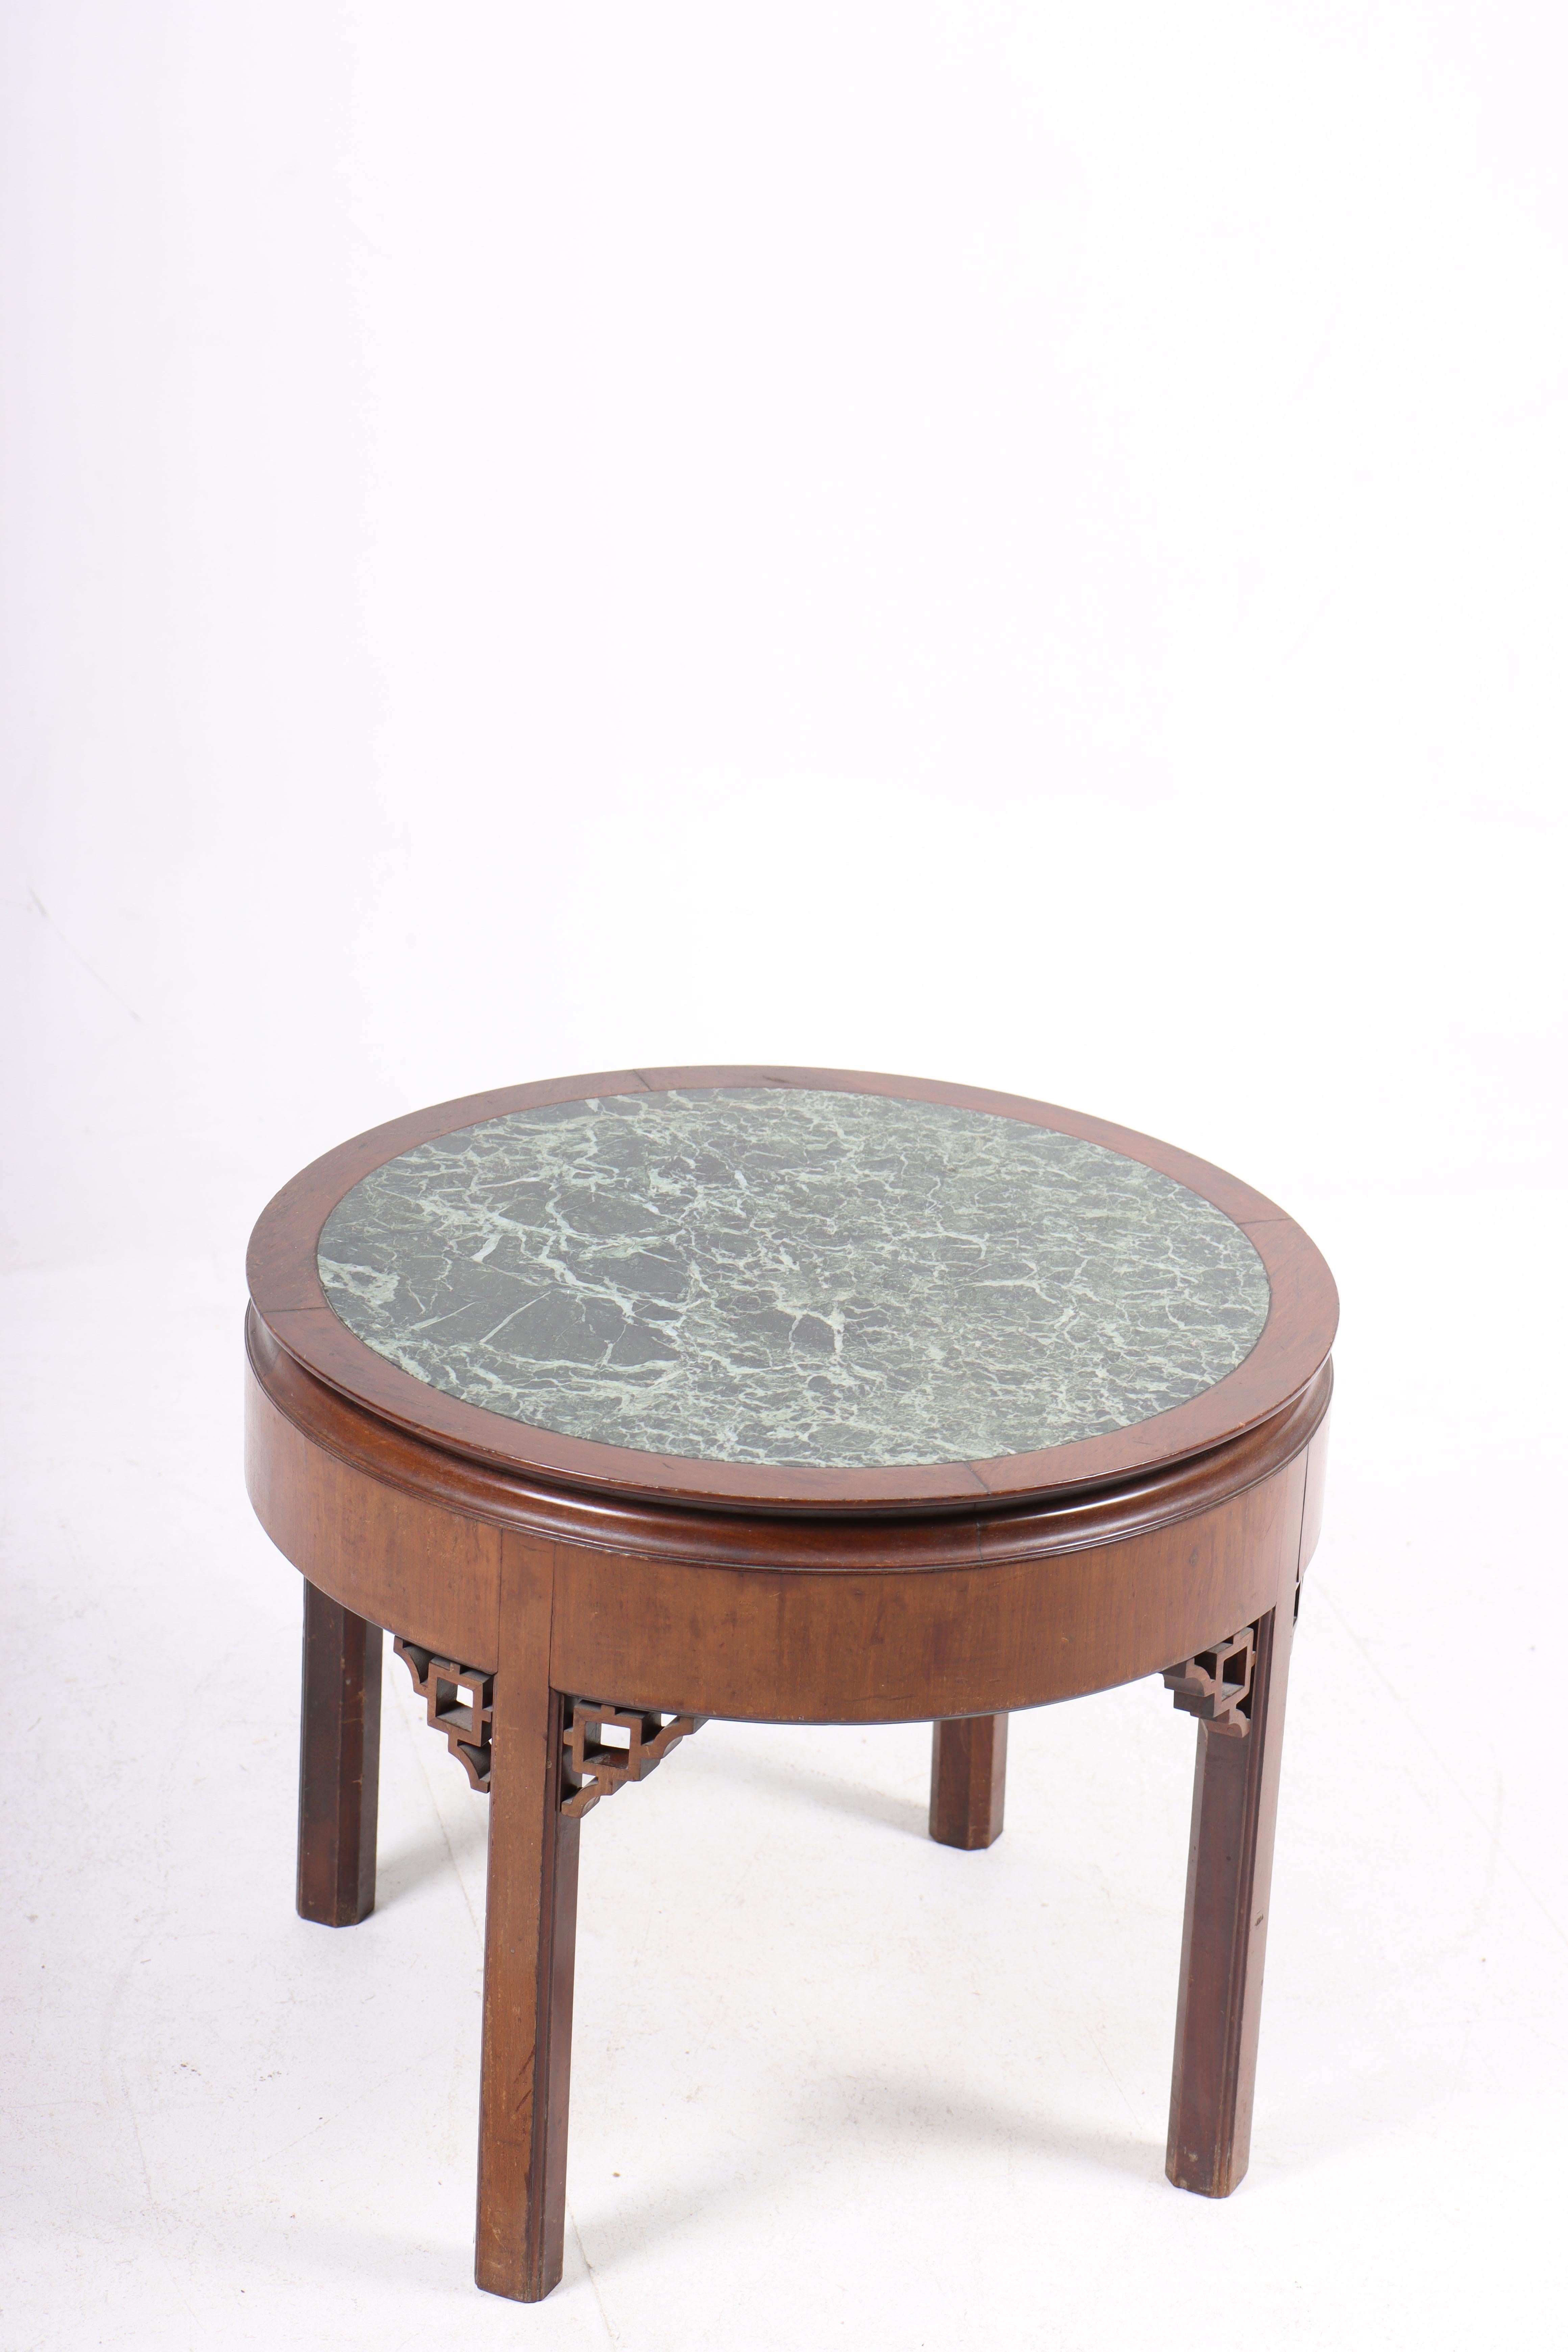 Low table in mahogany and marble top, designed and made in Denmark. Great original condition, circa 1930s.